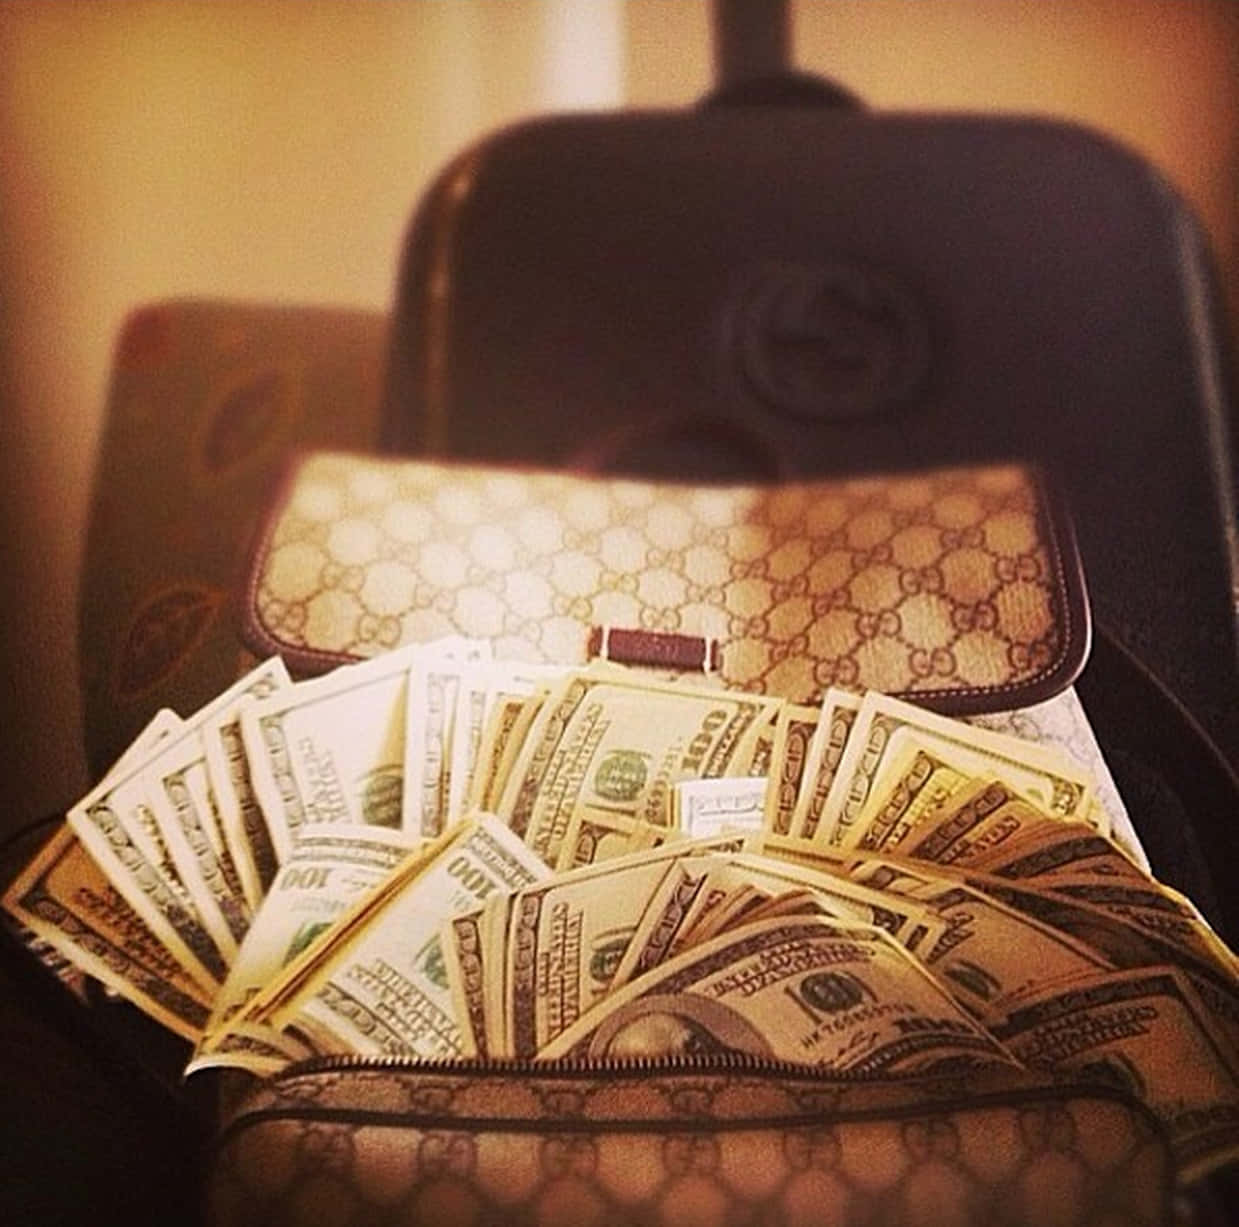 Download A Bag With Money In It Wallpaper